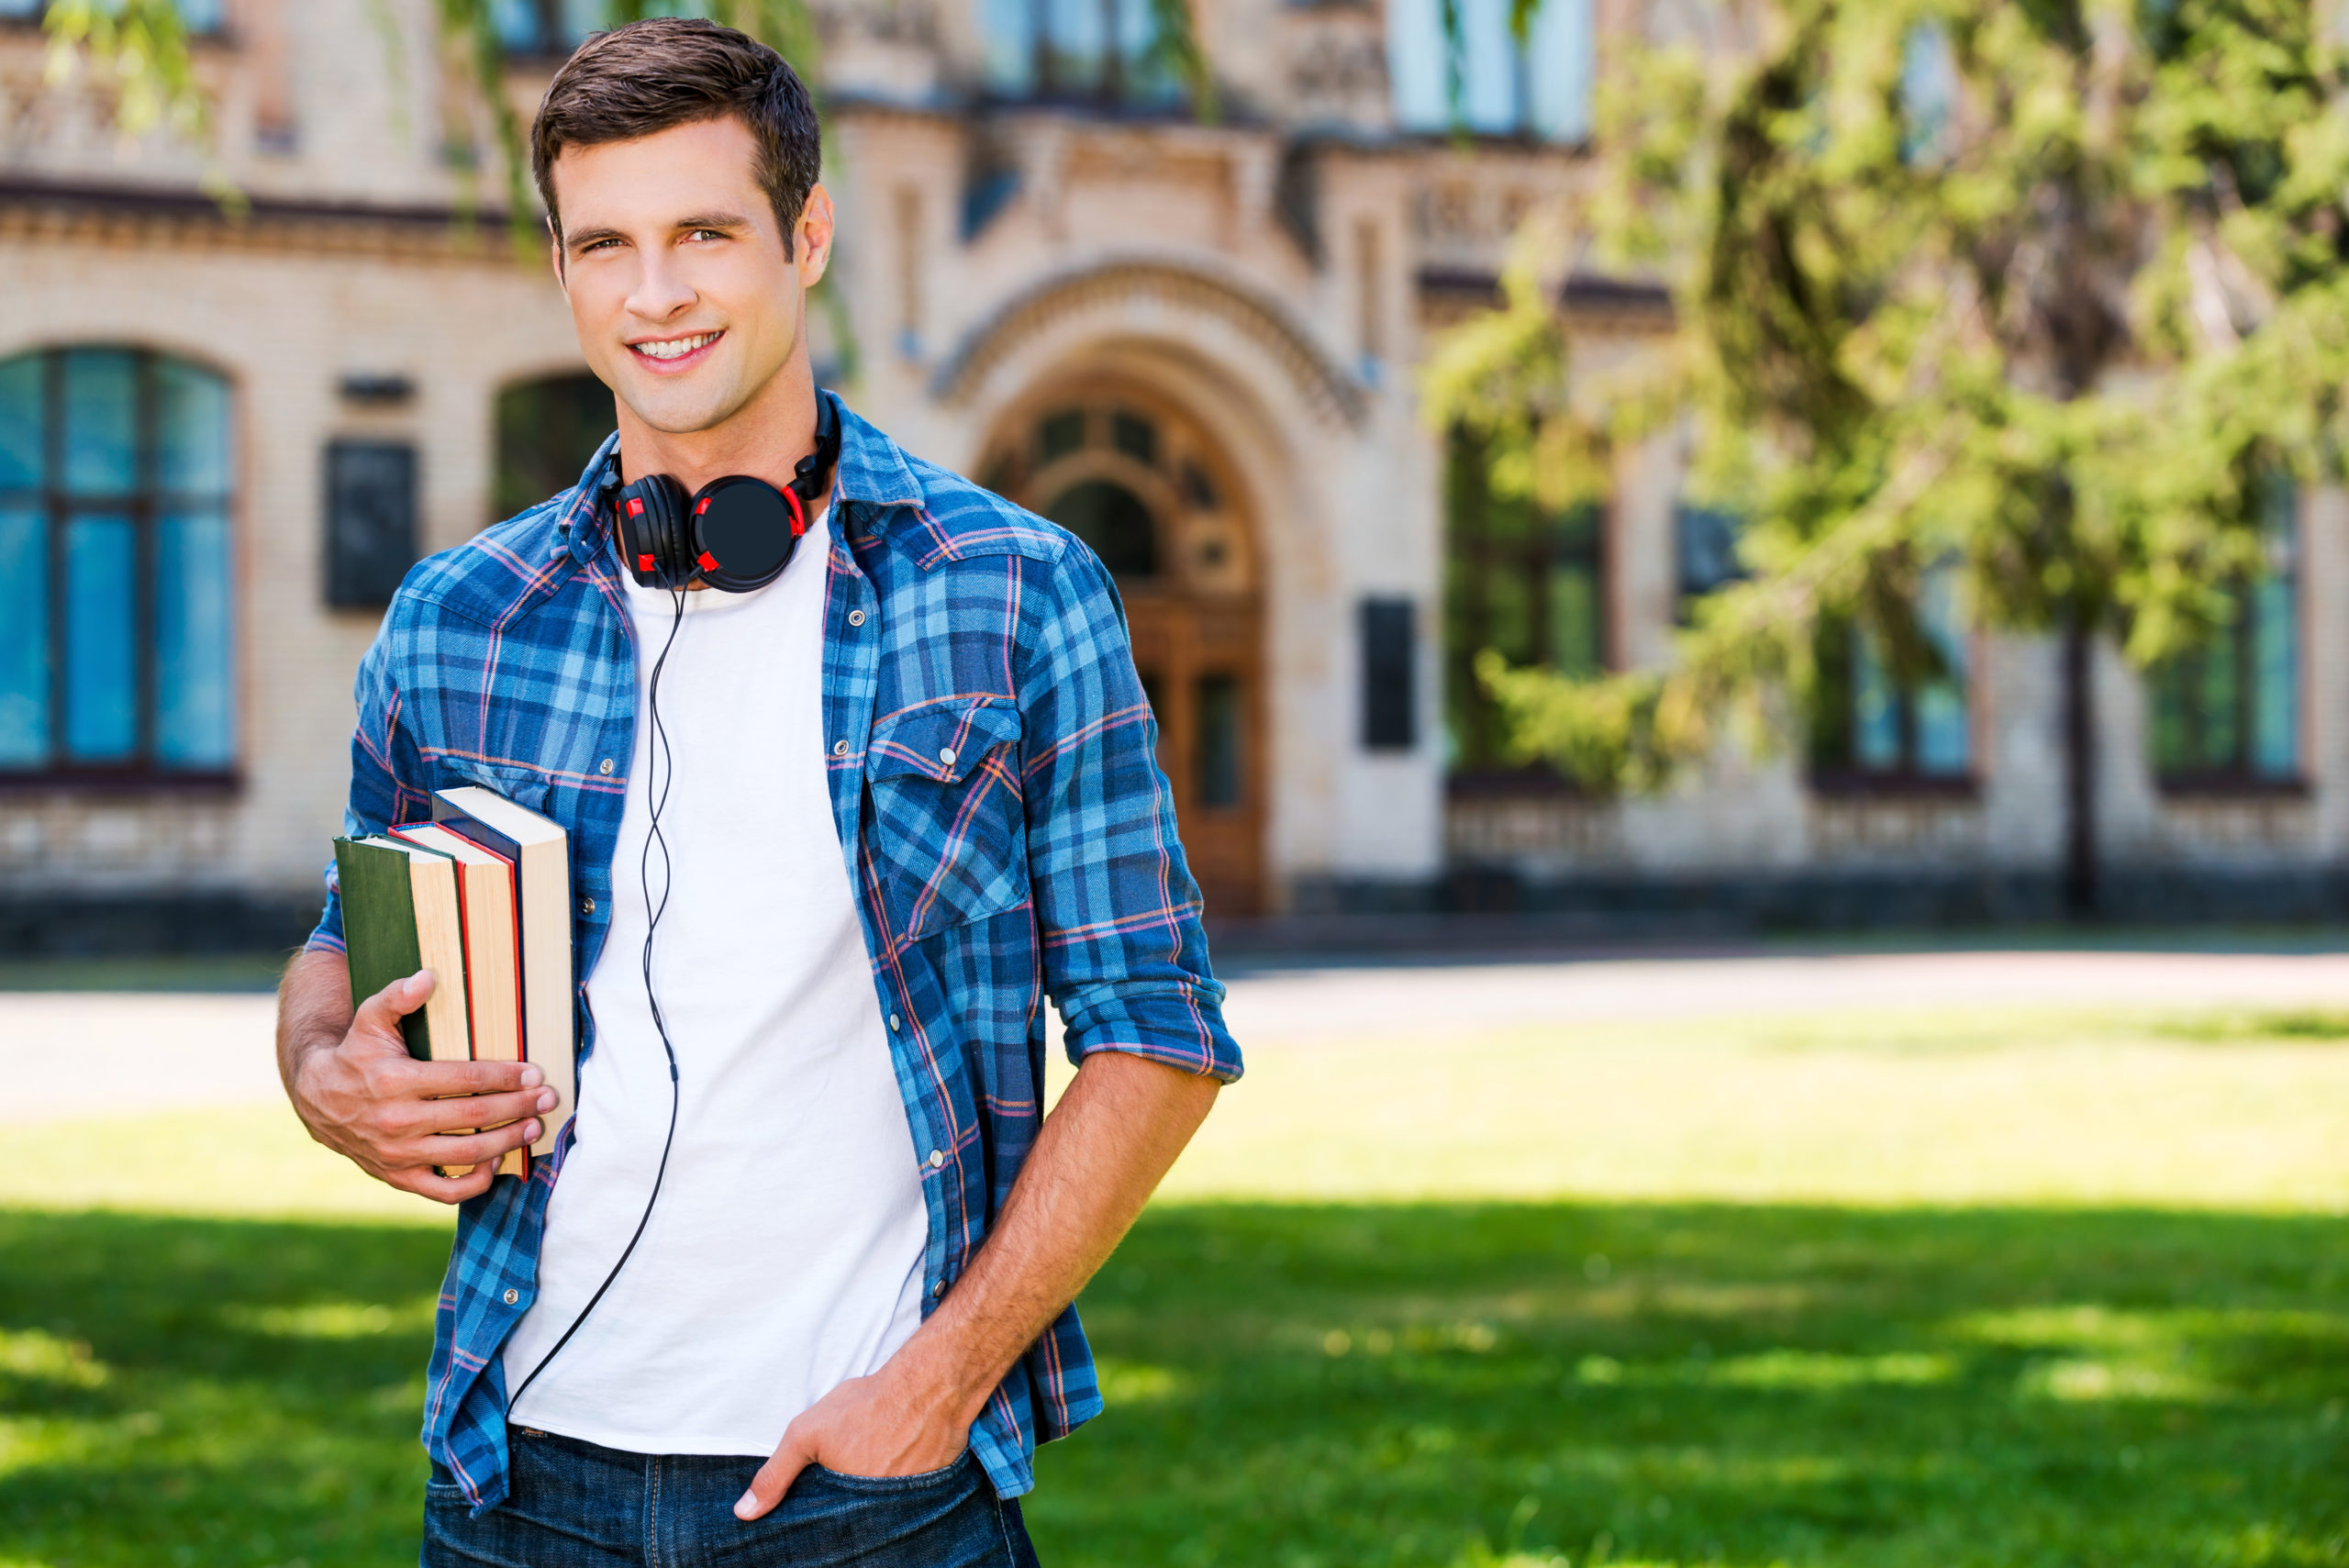 Confident student. Handsome young man holding books and smiling while standing in front of his university